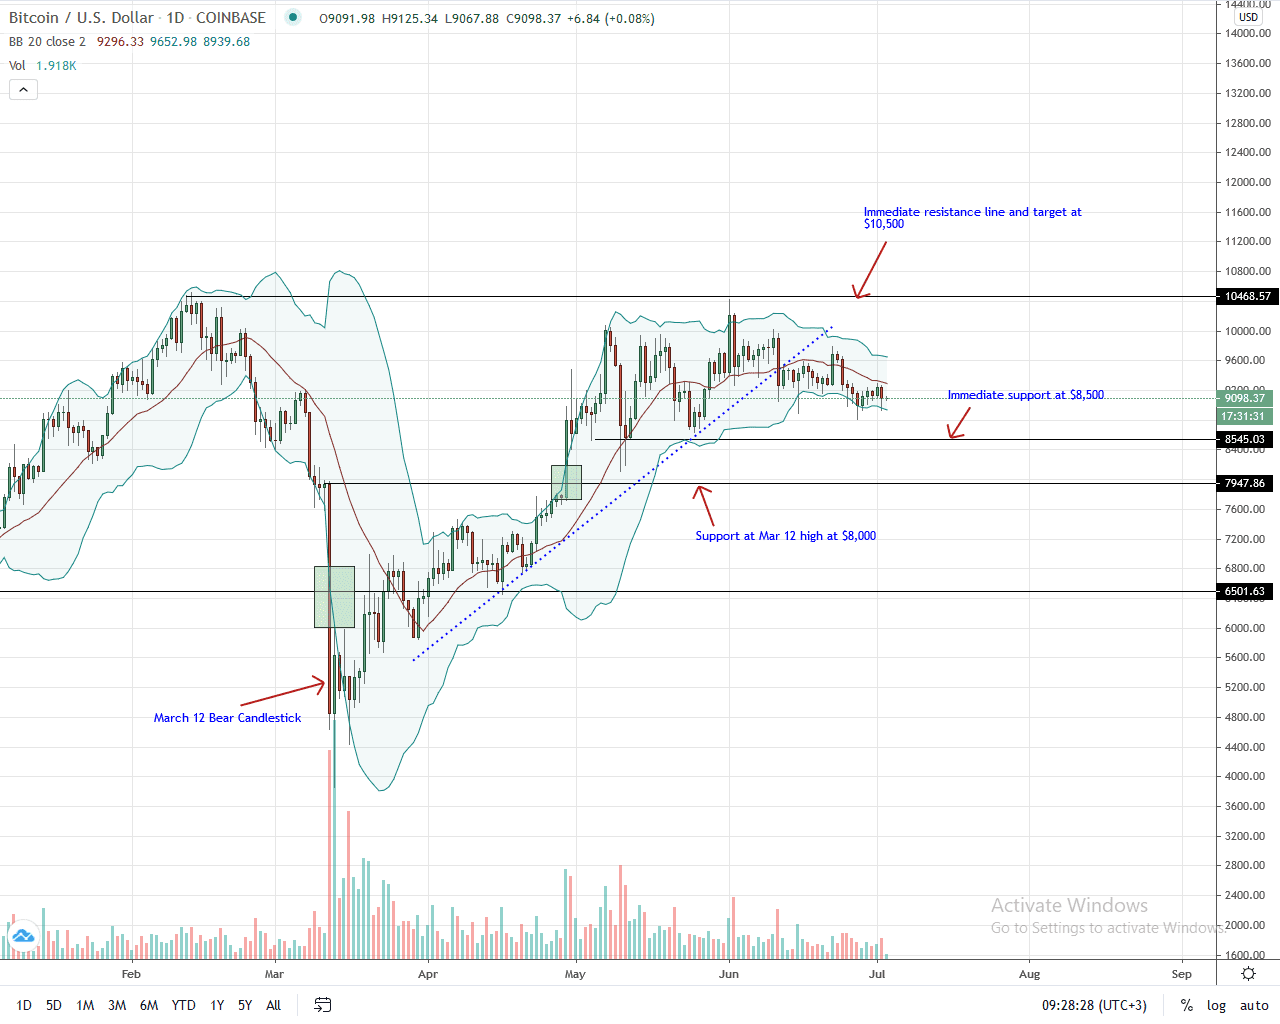 Bitcoin Daily Chart for July 3, 2020